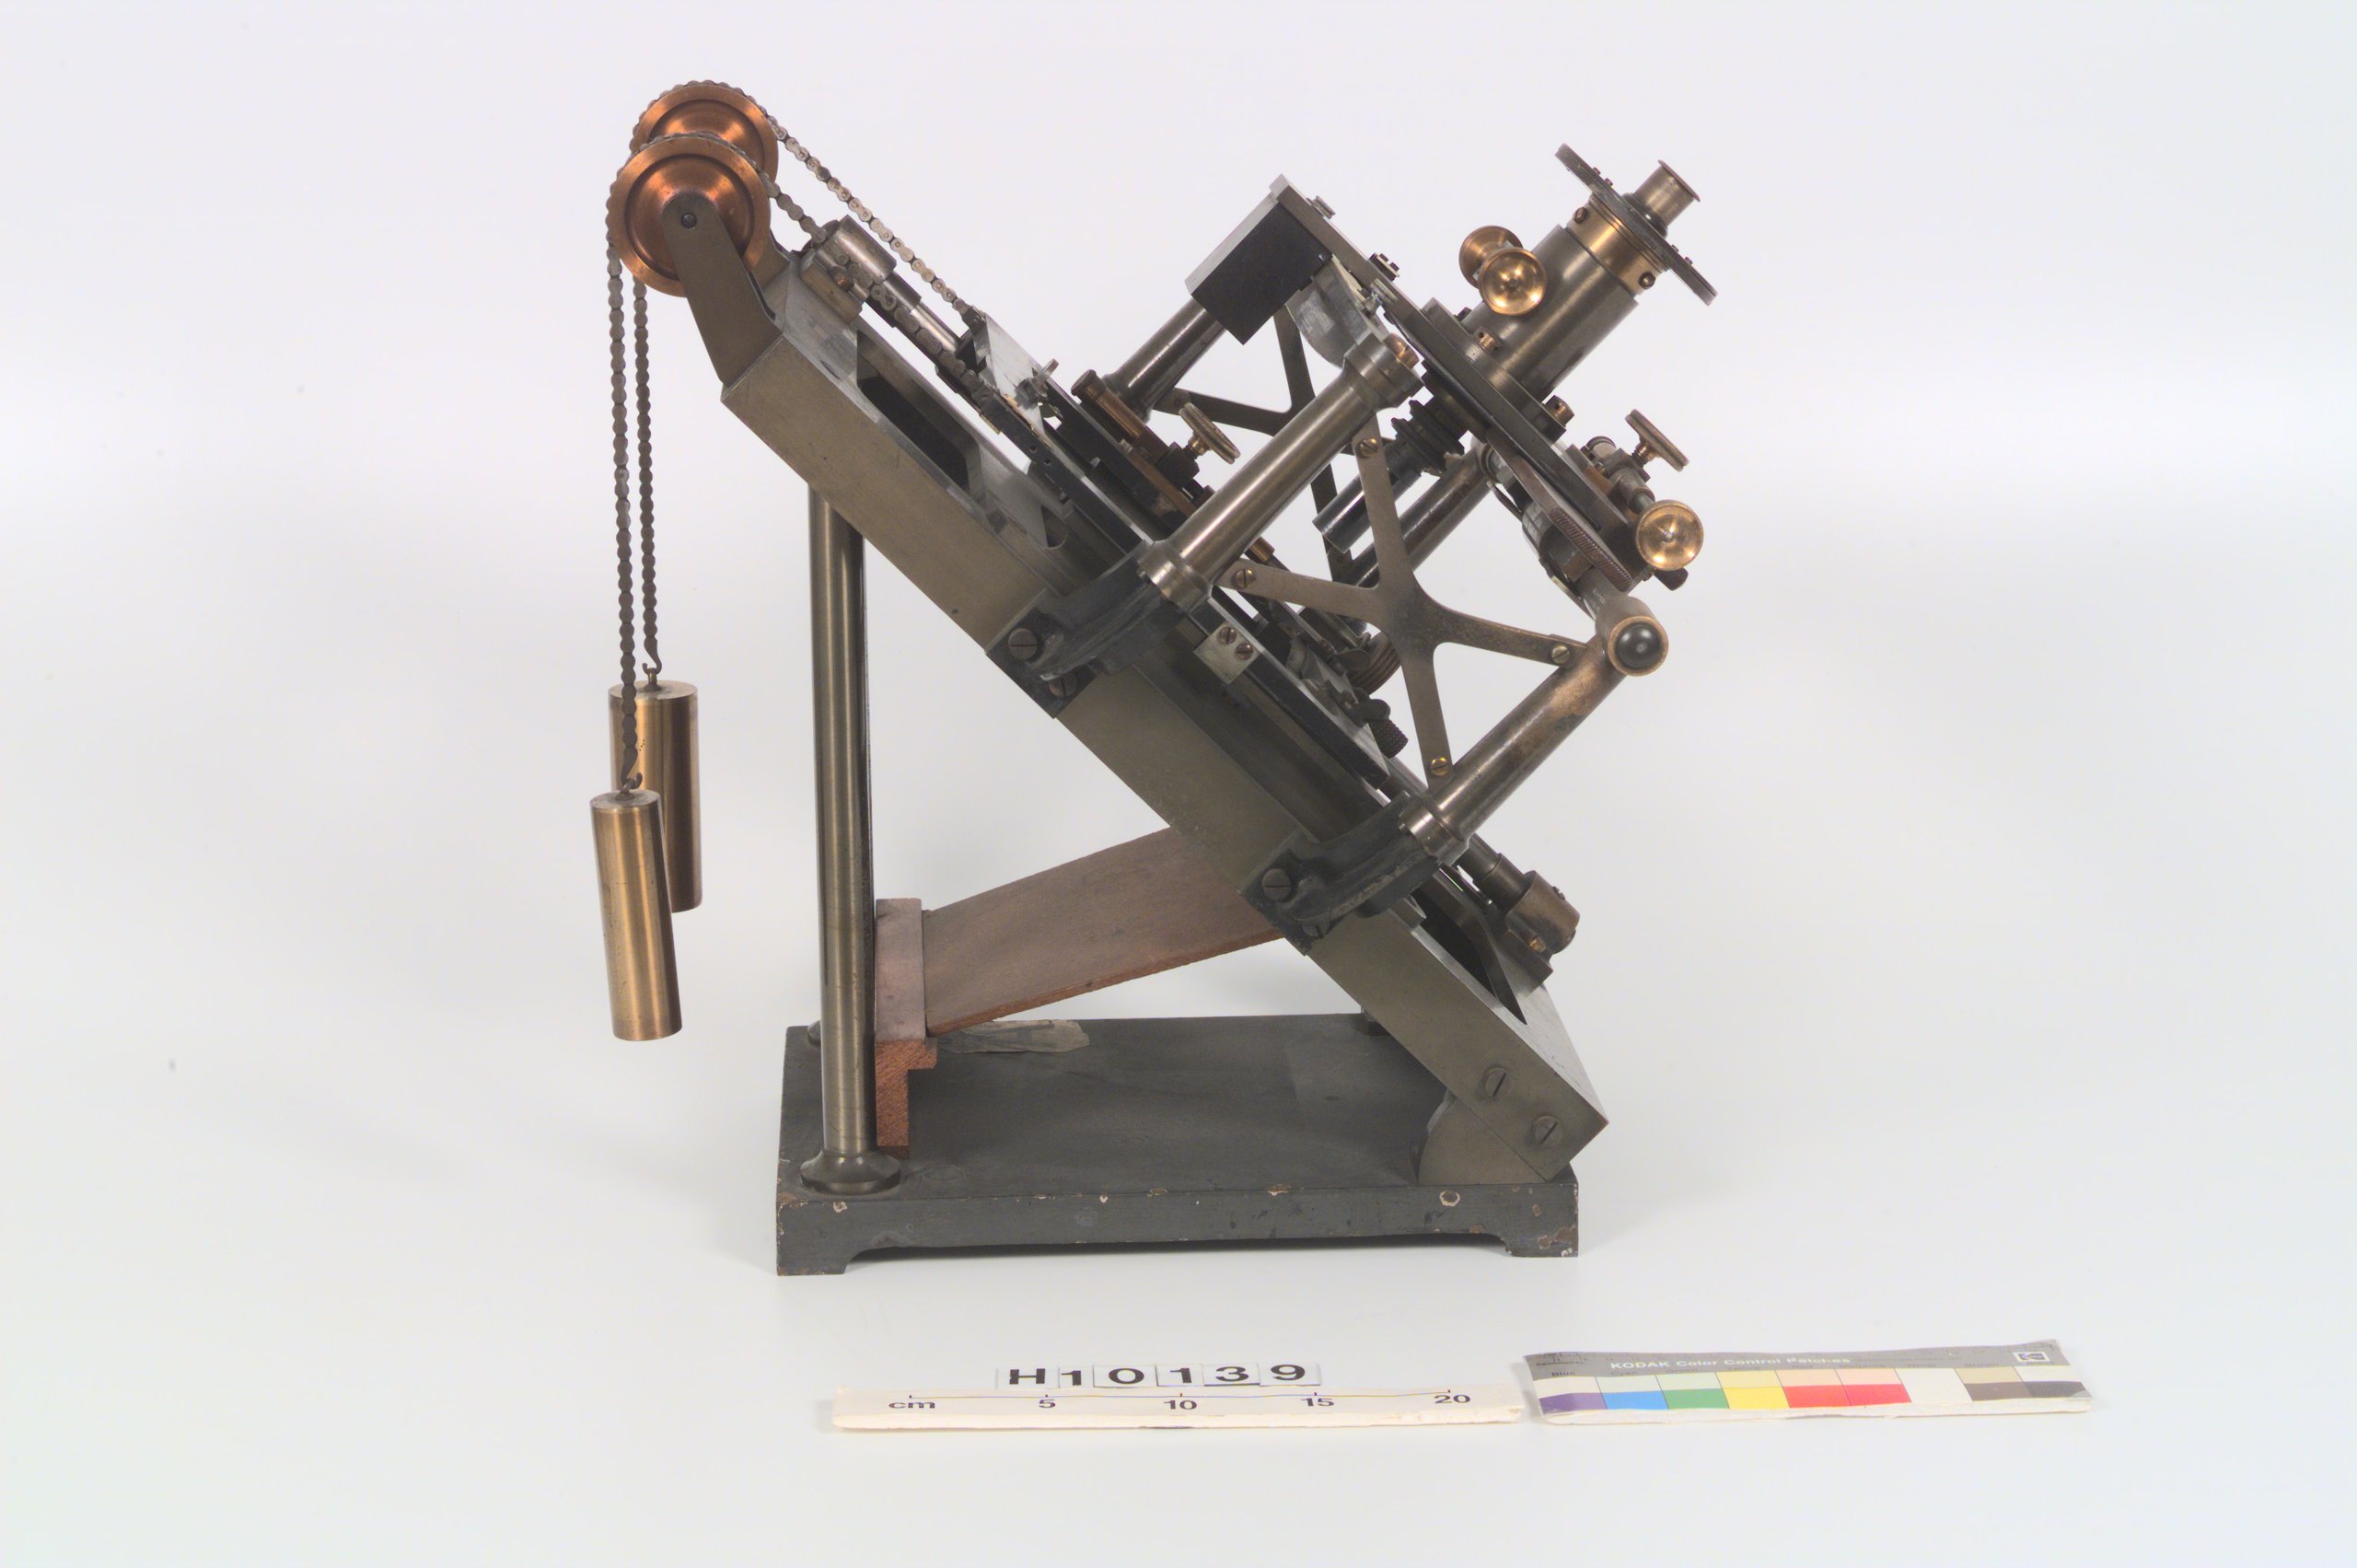 Astrographic plate measuring machine by Troughton and Simms